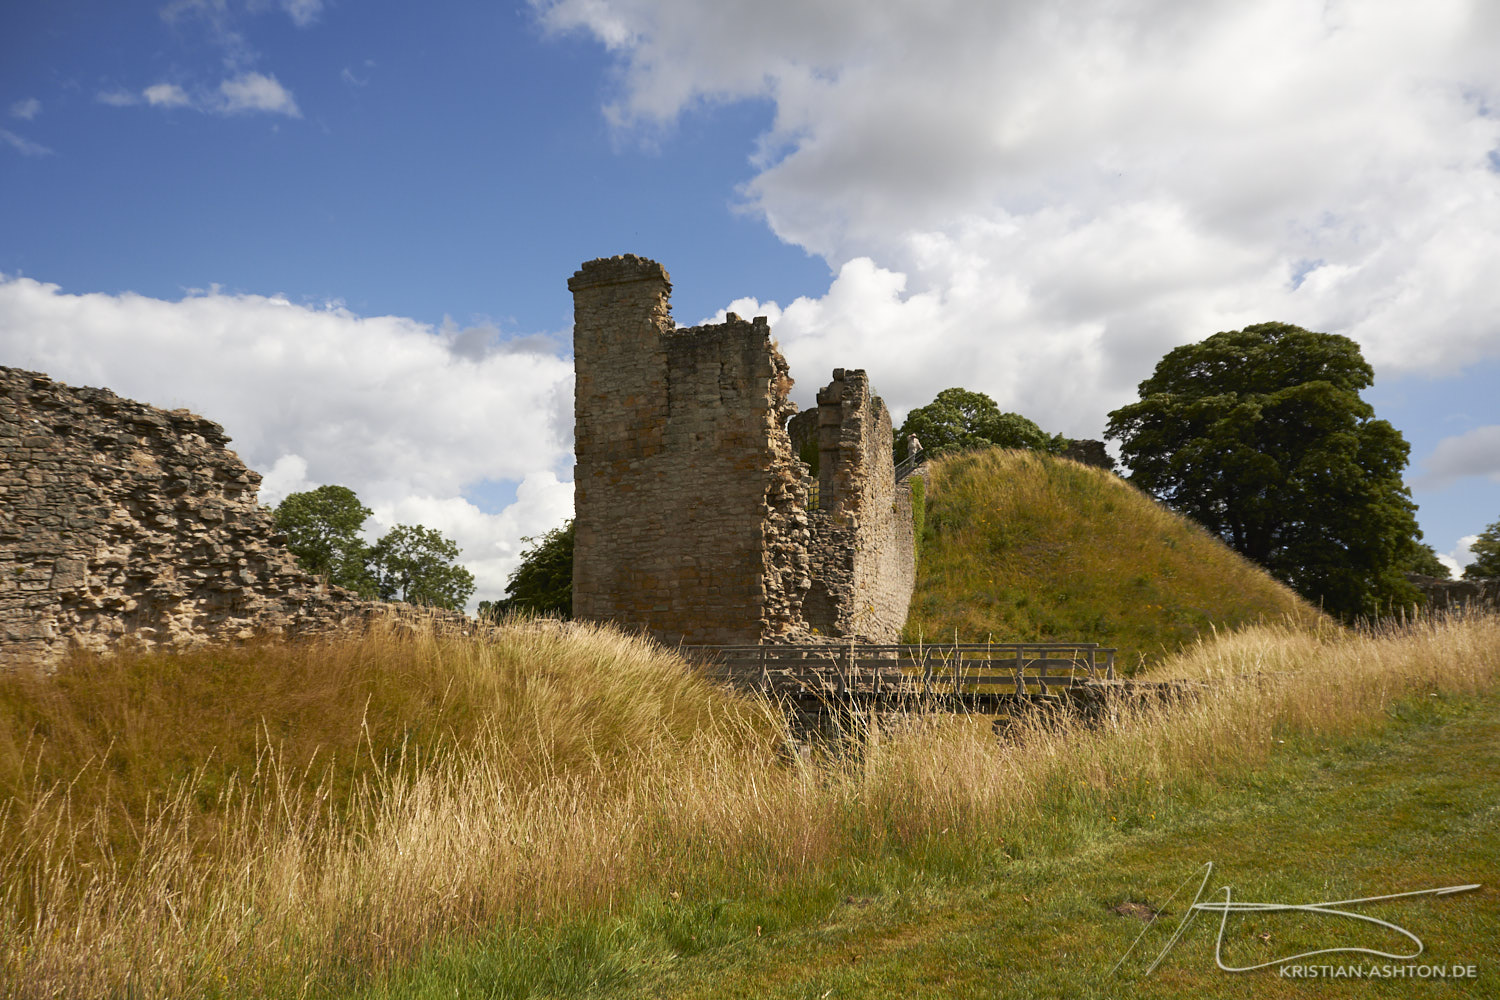 Pickering Castle - The ruins of an 11th century fortress